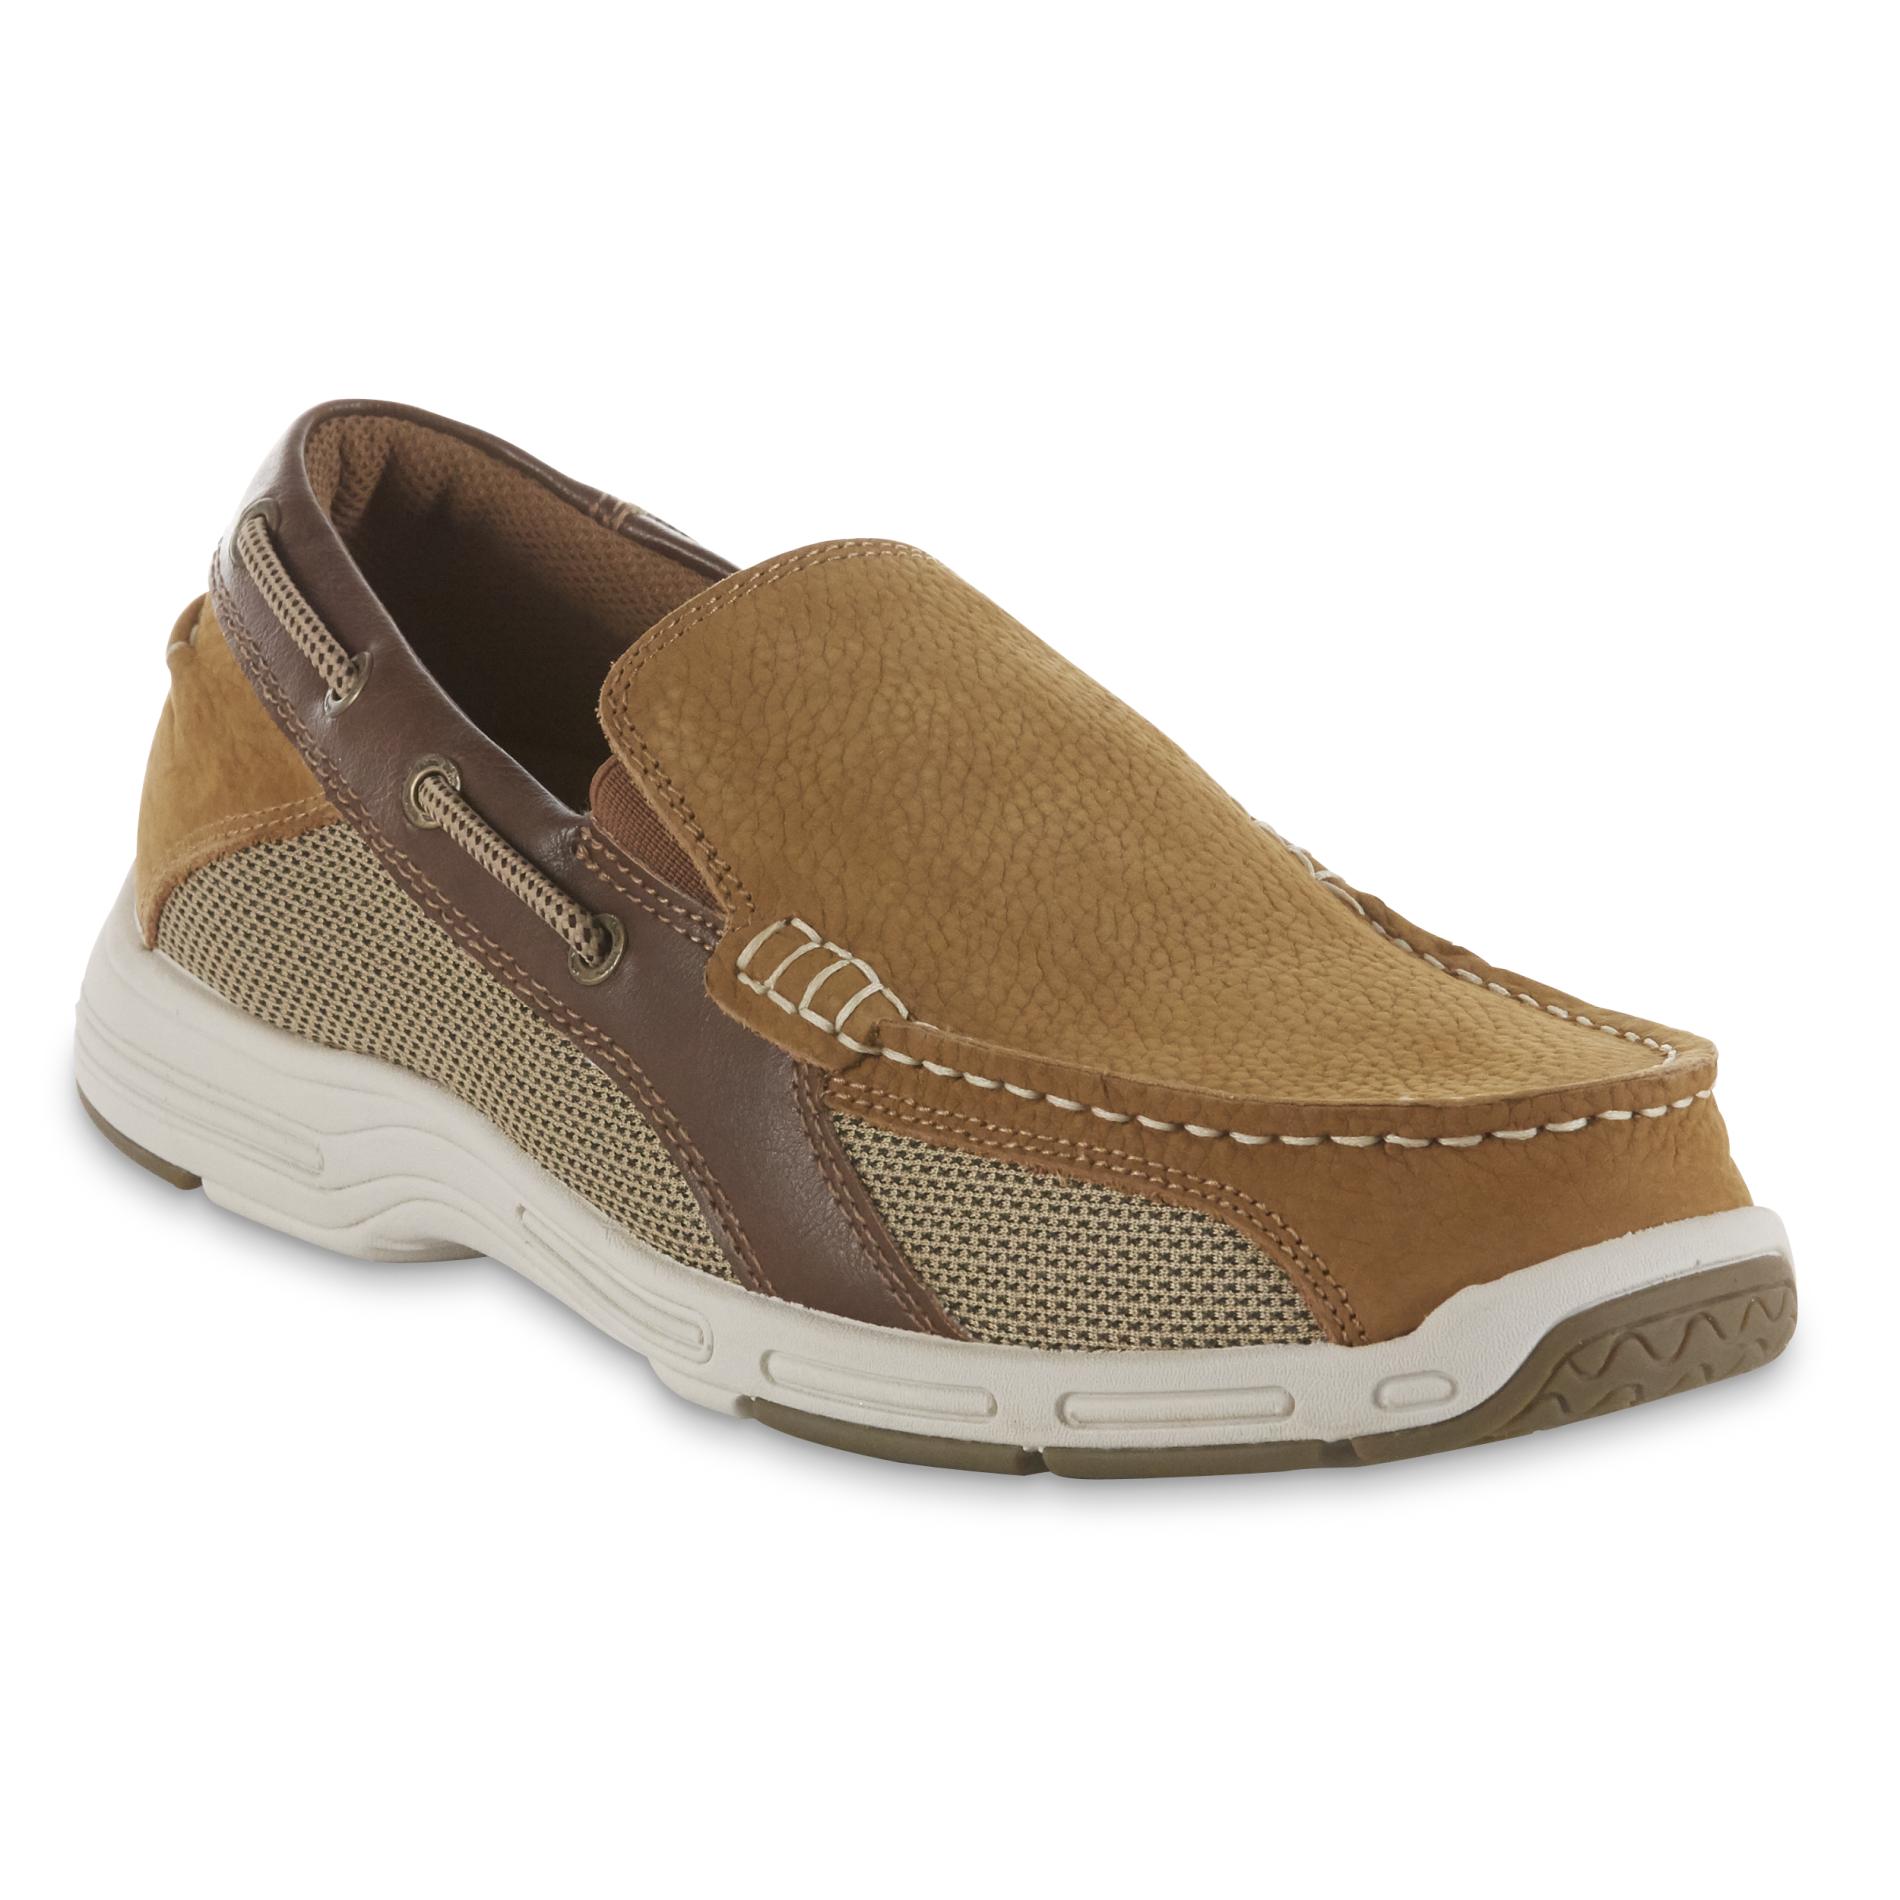 Men's Casual Shoes - Sears